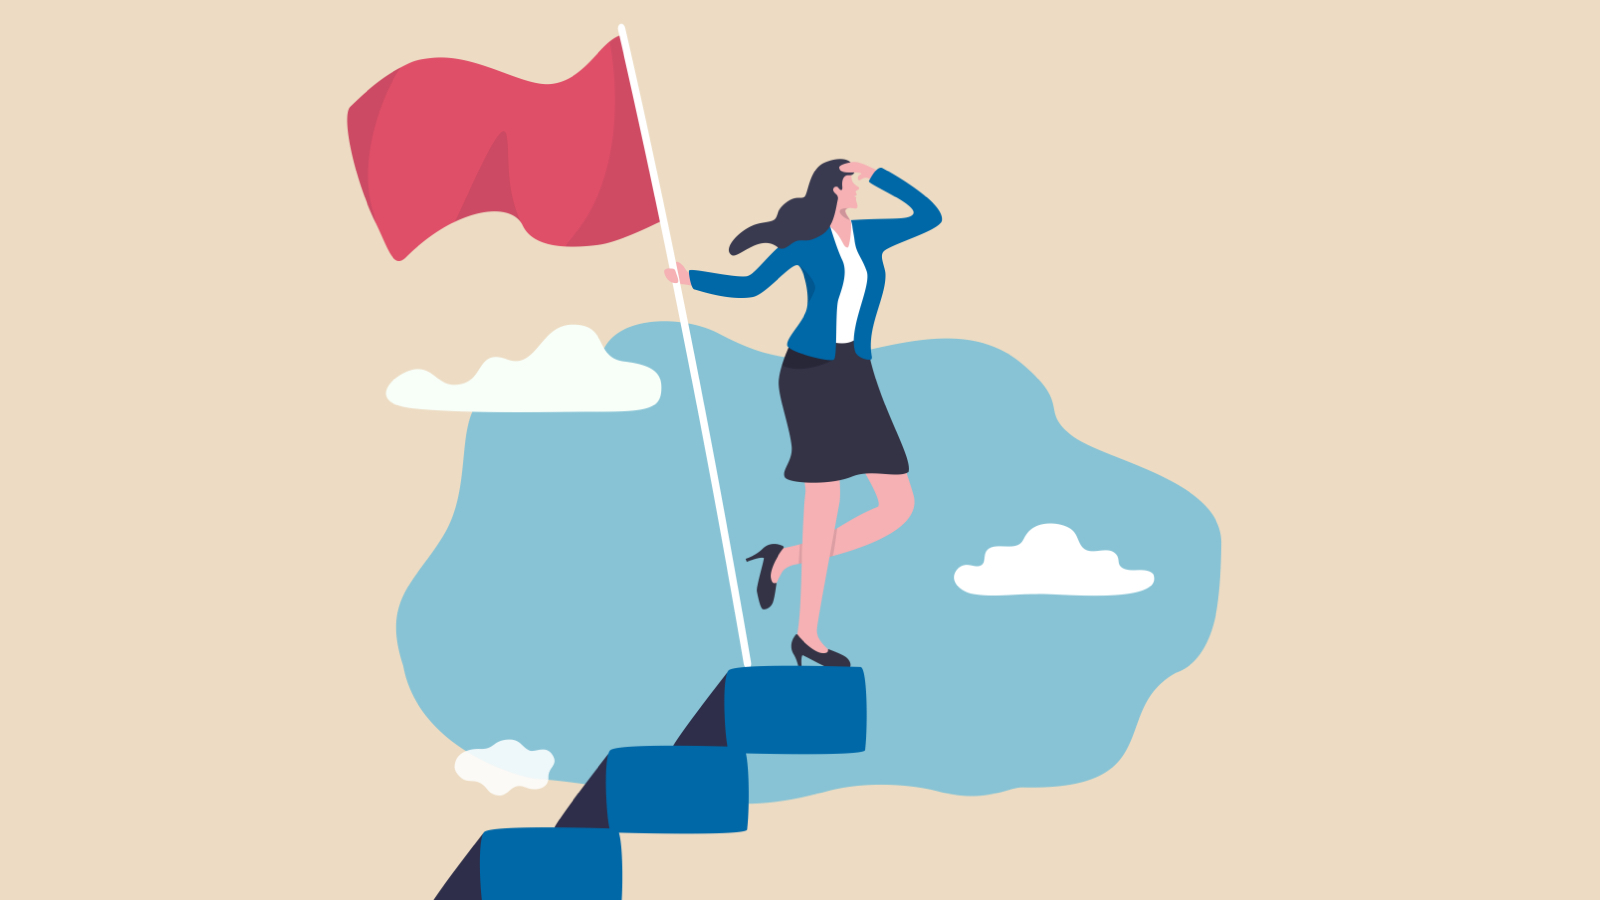 Woman stepping up to leadership, on top of career staircase holding winning flag looking for future visionary.